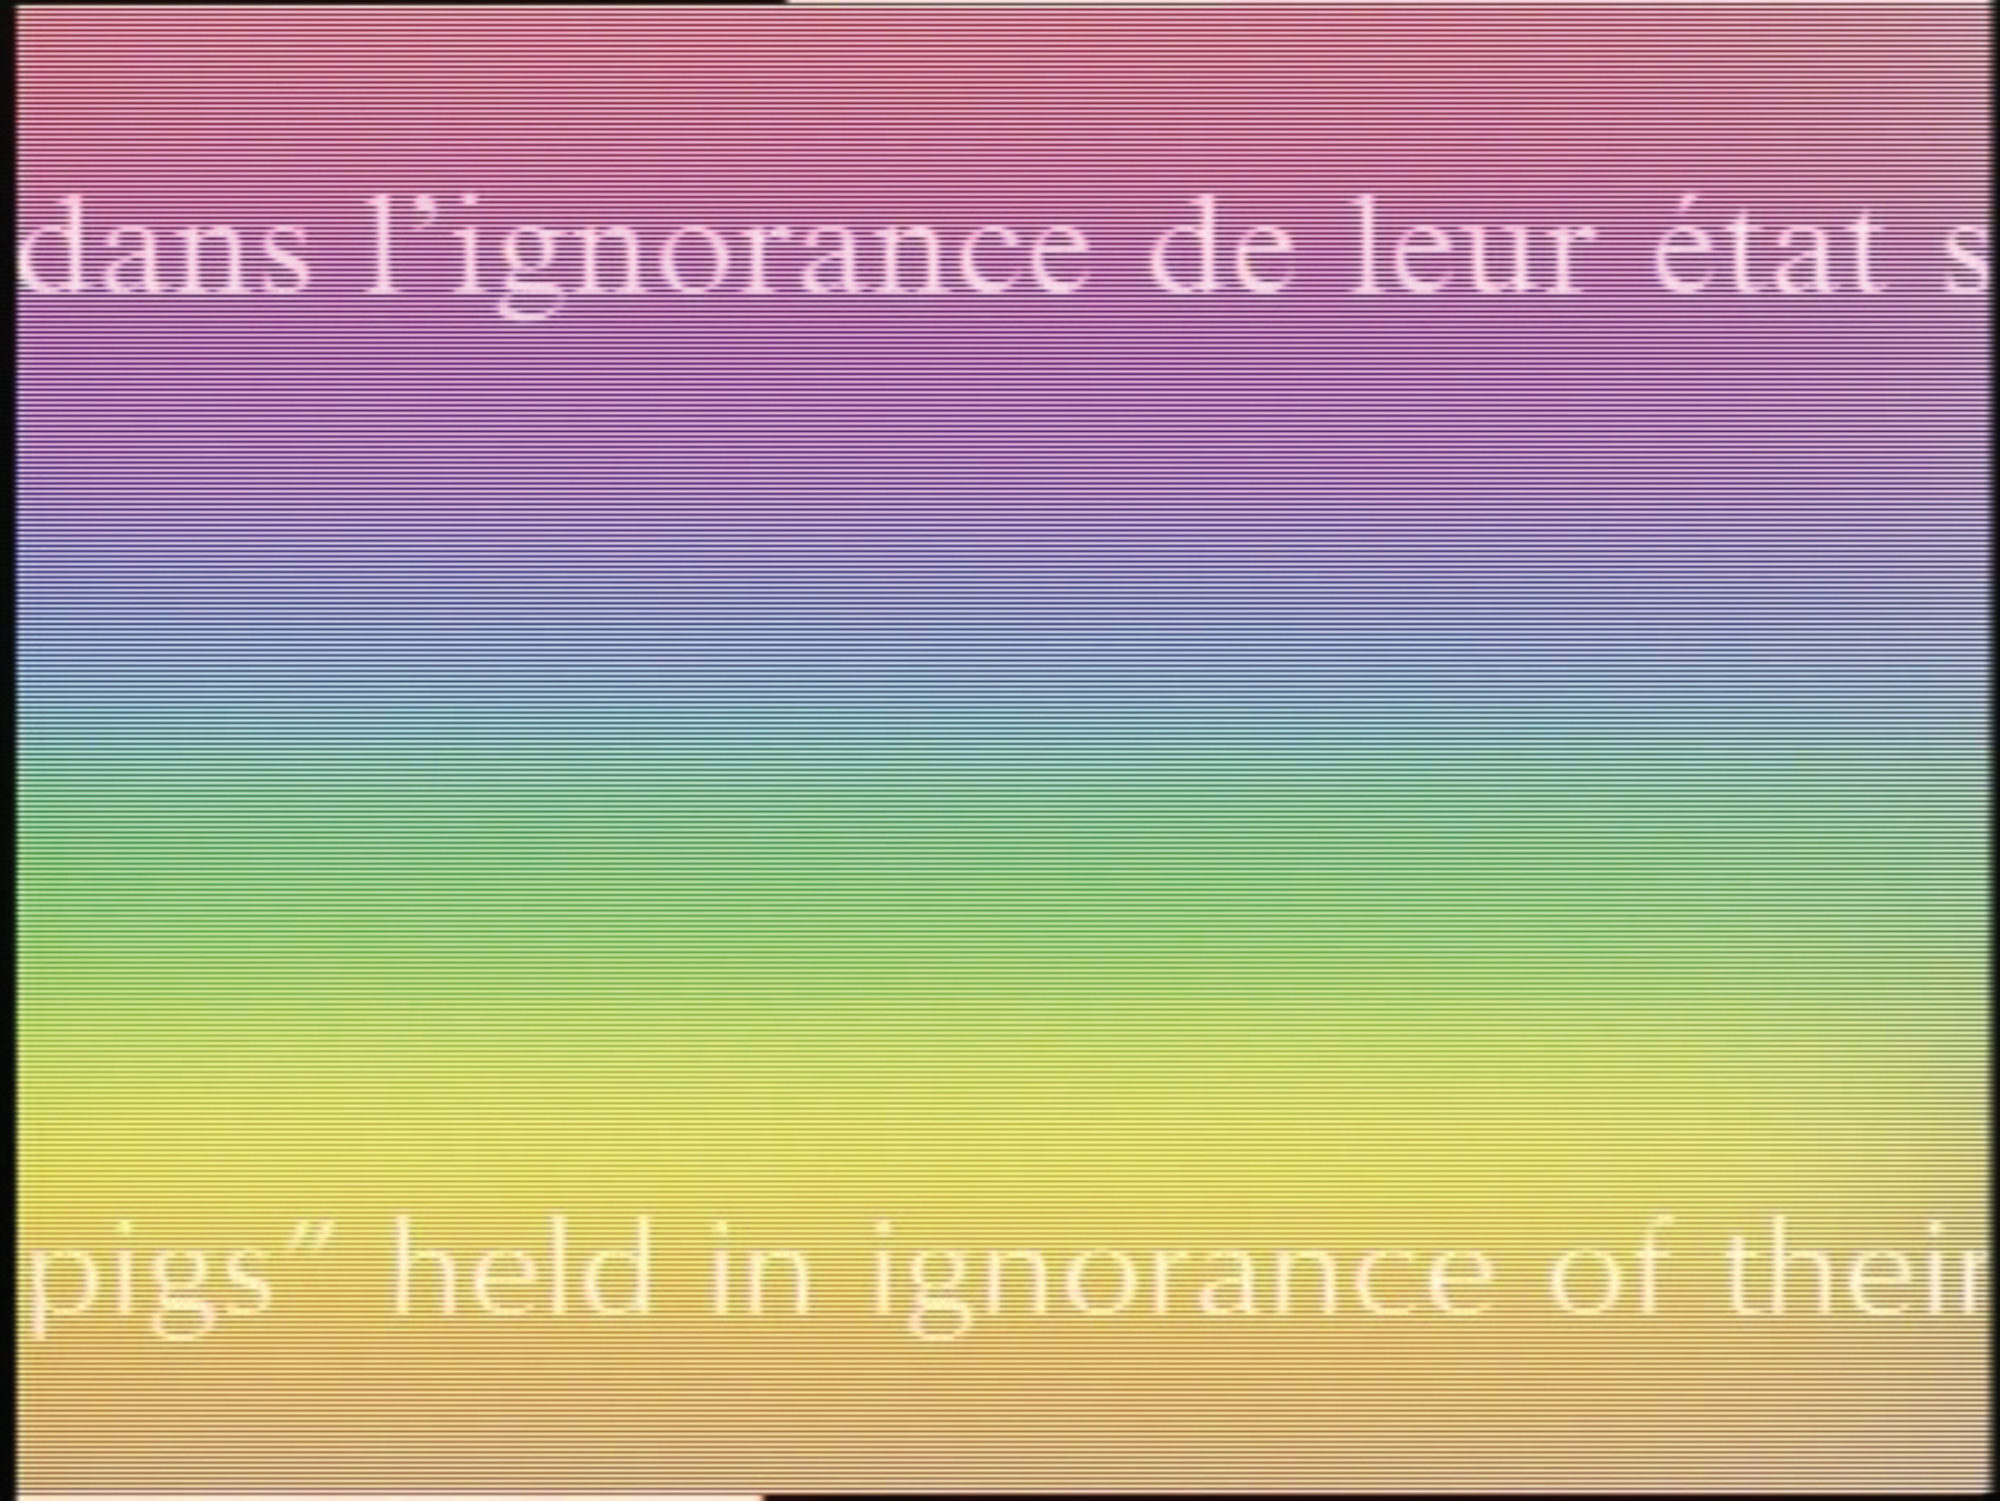 rainbow colored background with white text in French and English